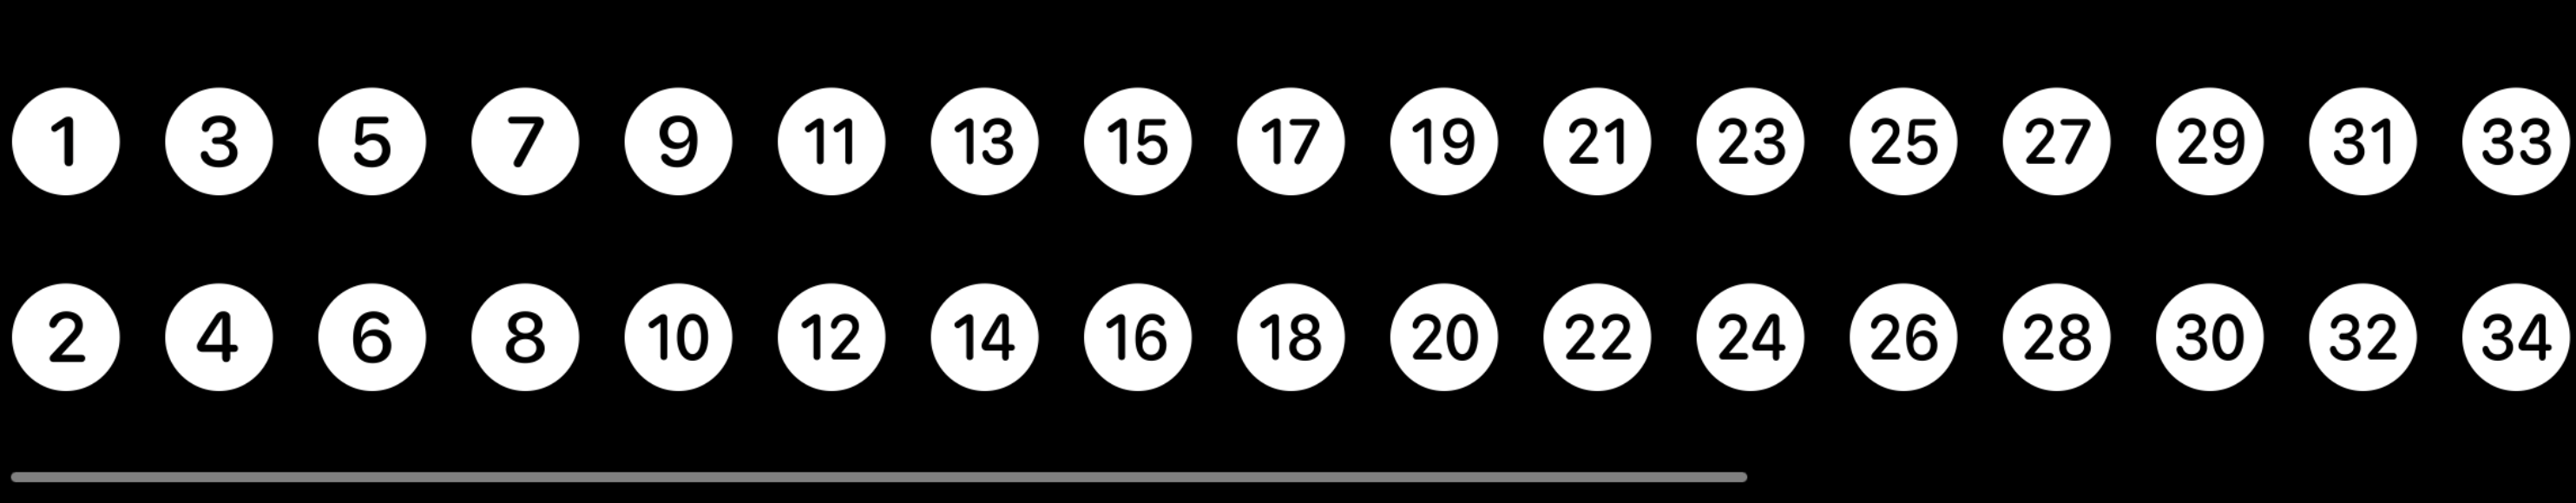 Two rows of number symbols, with a horizontal scroll bar indicating more to the right.